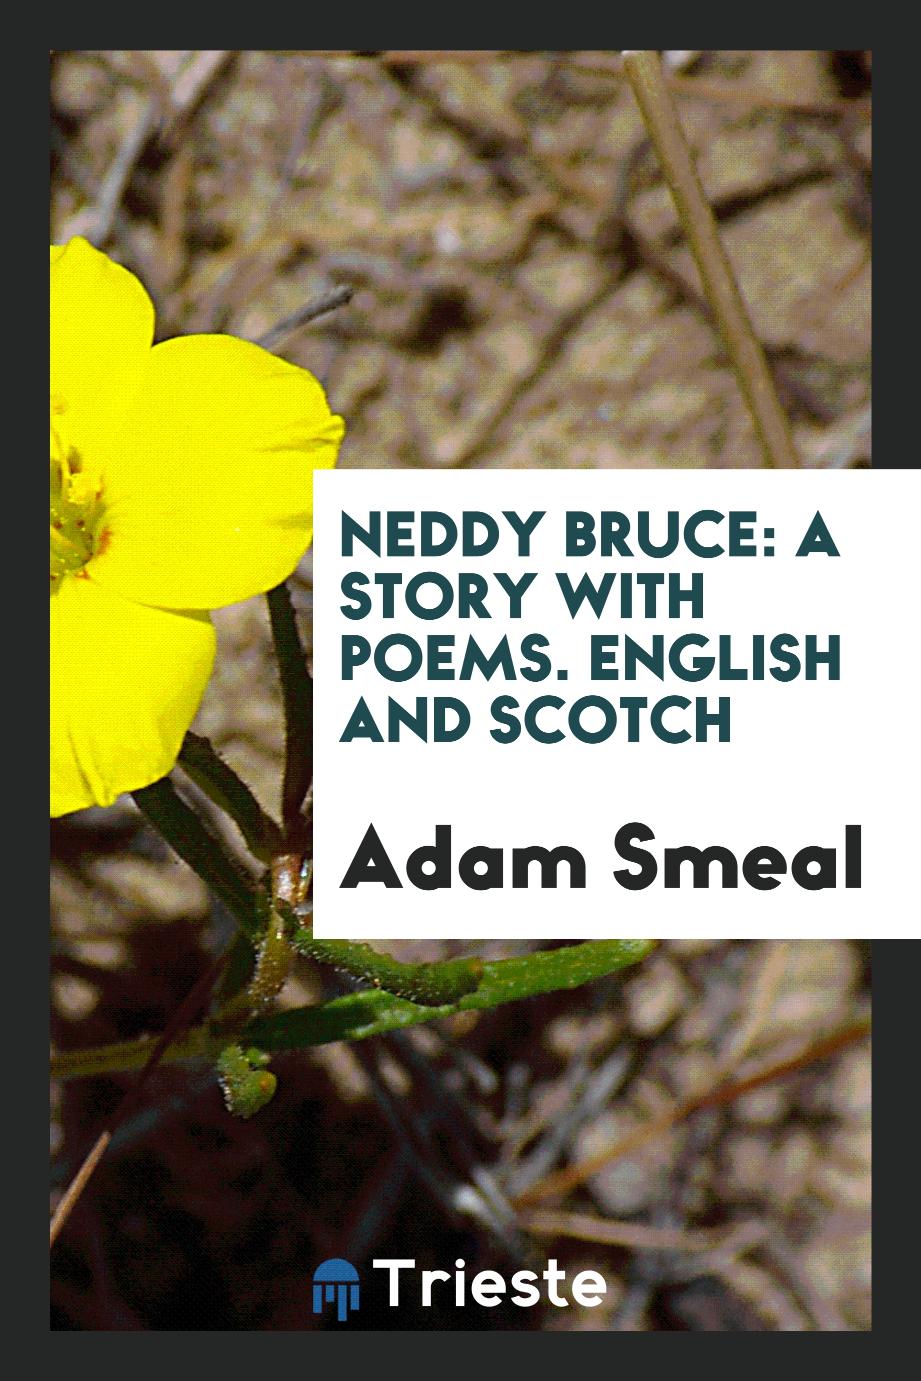 Neddy Bruce: A Story with Poems. English and Scotch